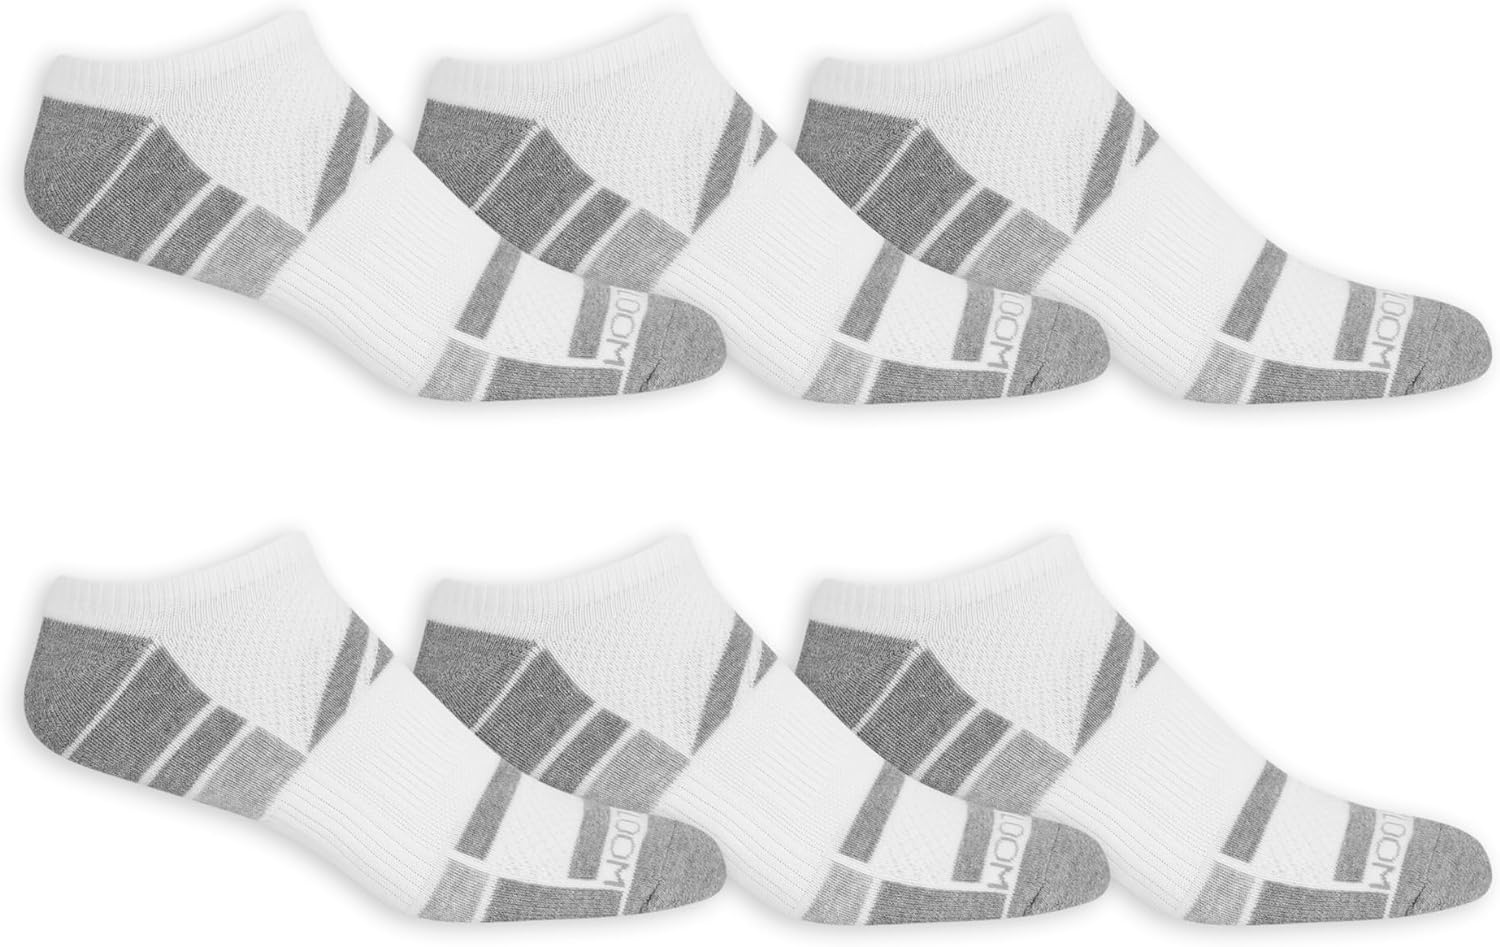 Fruit of the Loom Men' Breathable Performance Cushioned Socks-6 Pair Pack, White, Shoe Size : 6-12